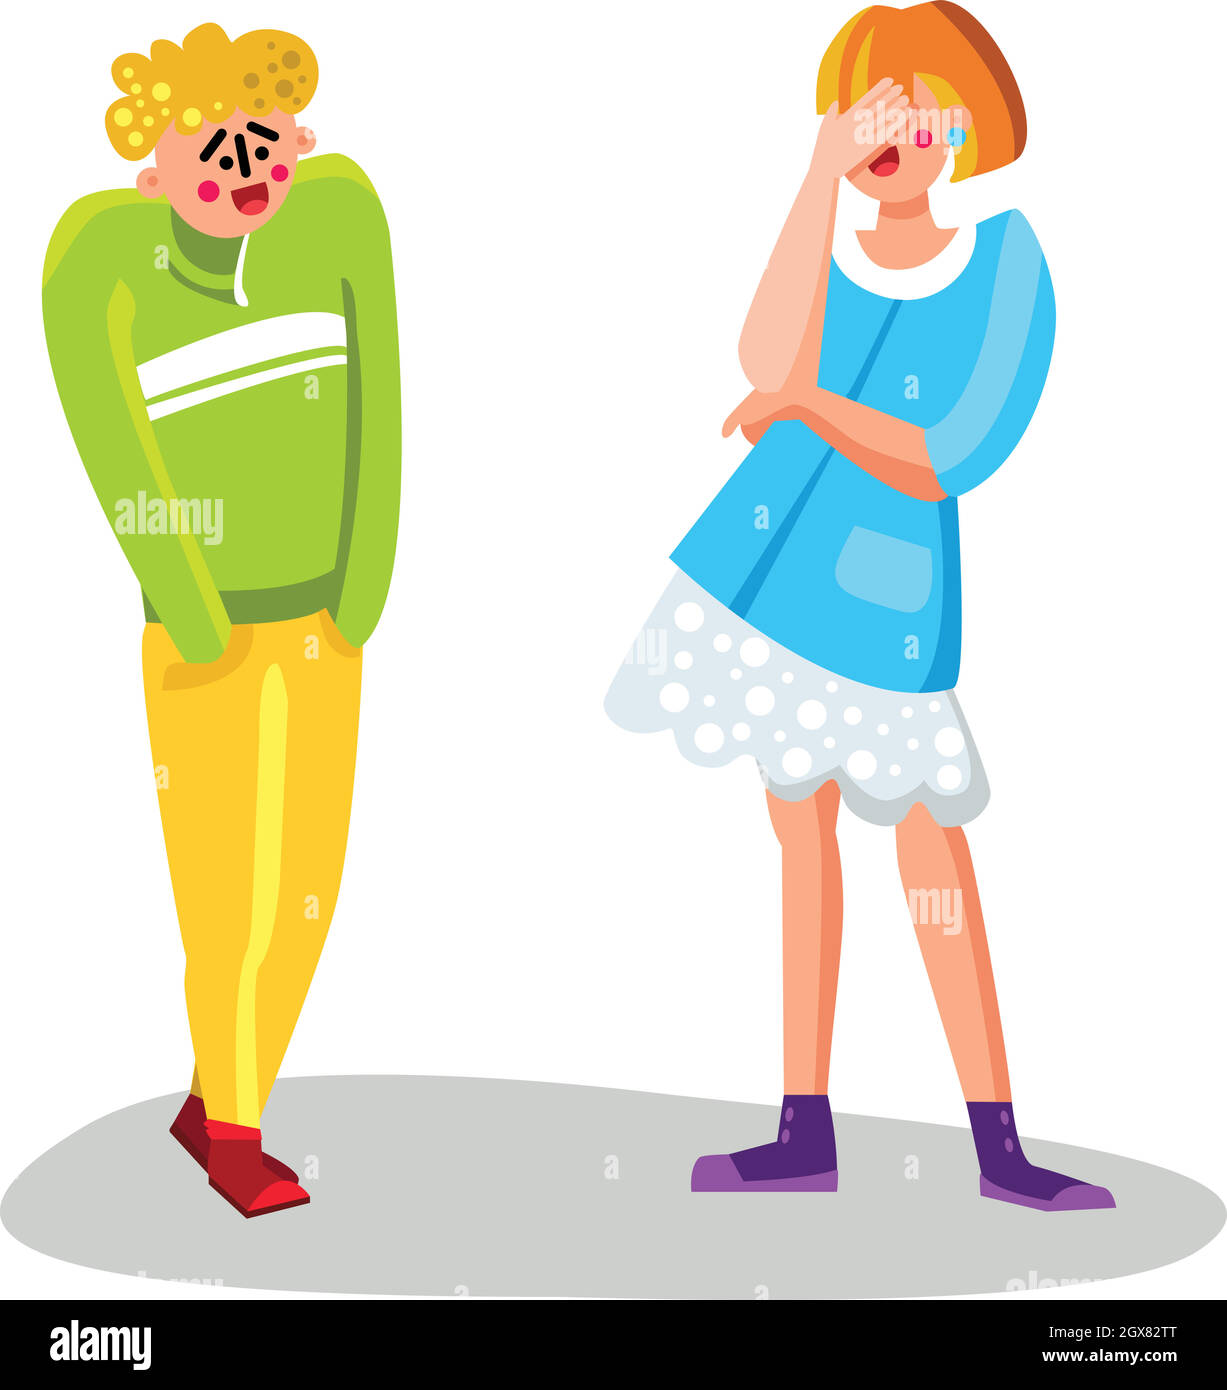 Embarrassed Man And Laughing Young Girl Vector Stock Vector